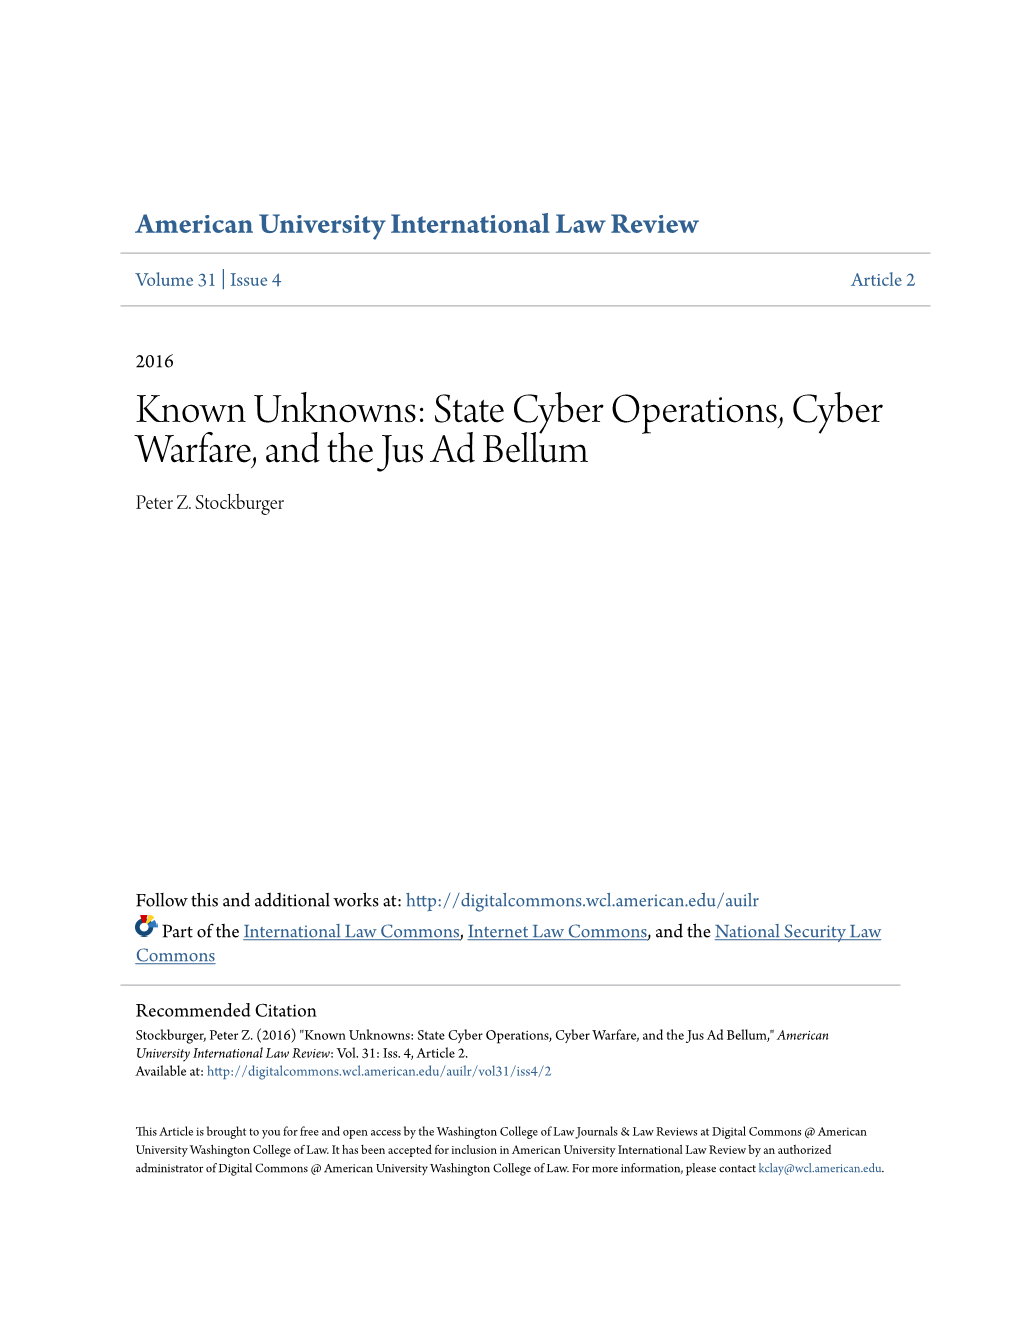 State Cyber Operations, Cyber Warfare, and the Jus Ad Bellum Peter Z